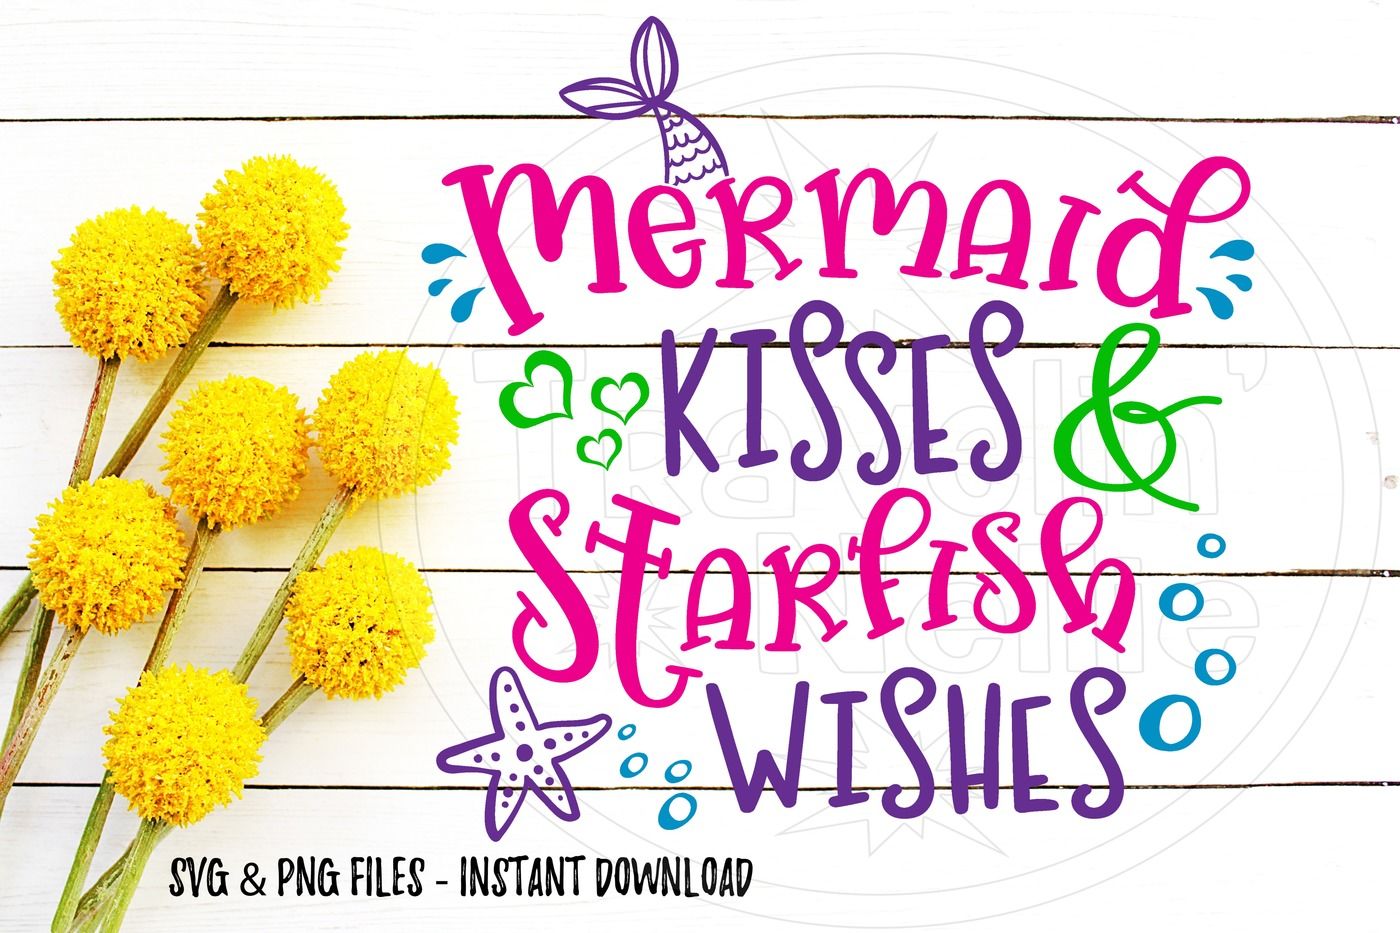 Download Mermaid Kisses Starfish Wishes SVG PNG Image For Cutting ...